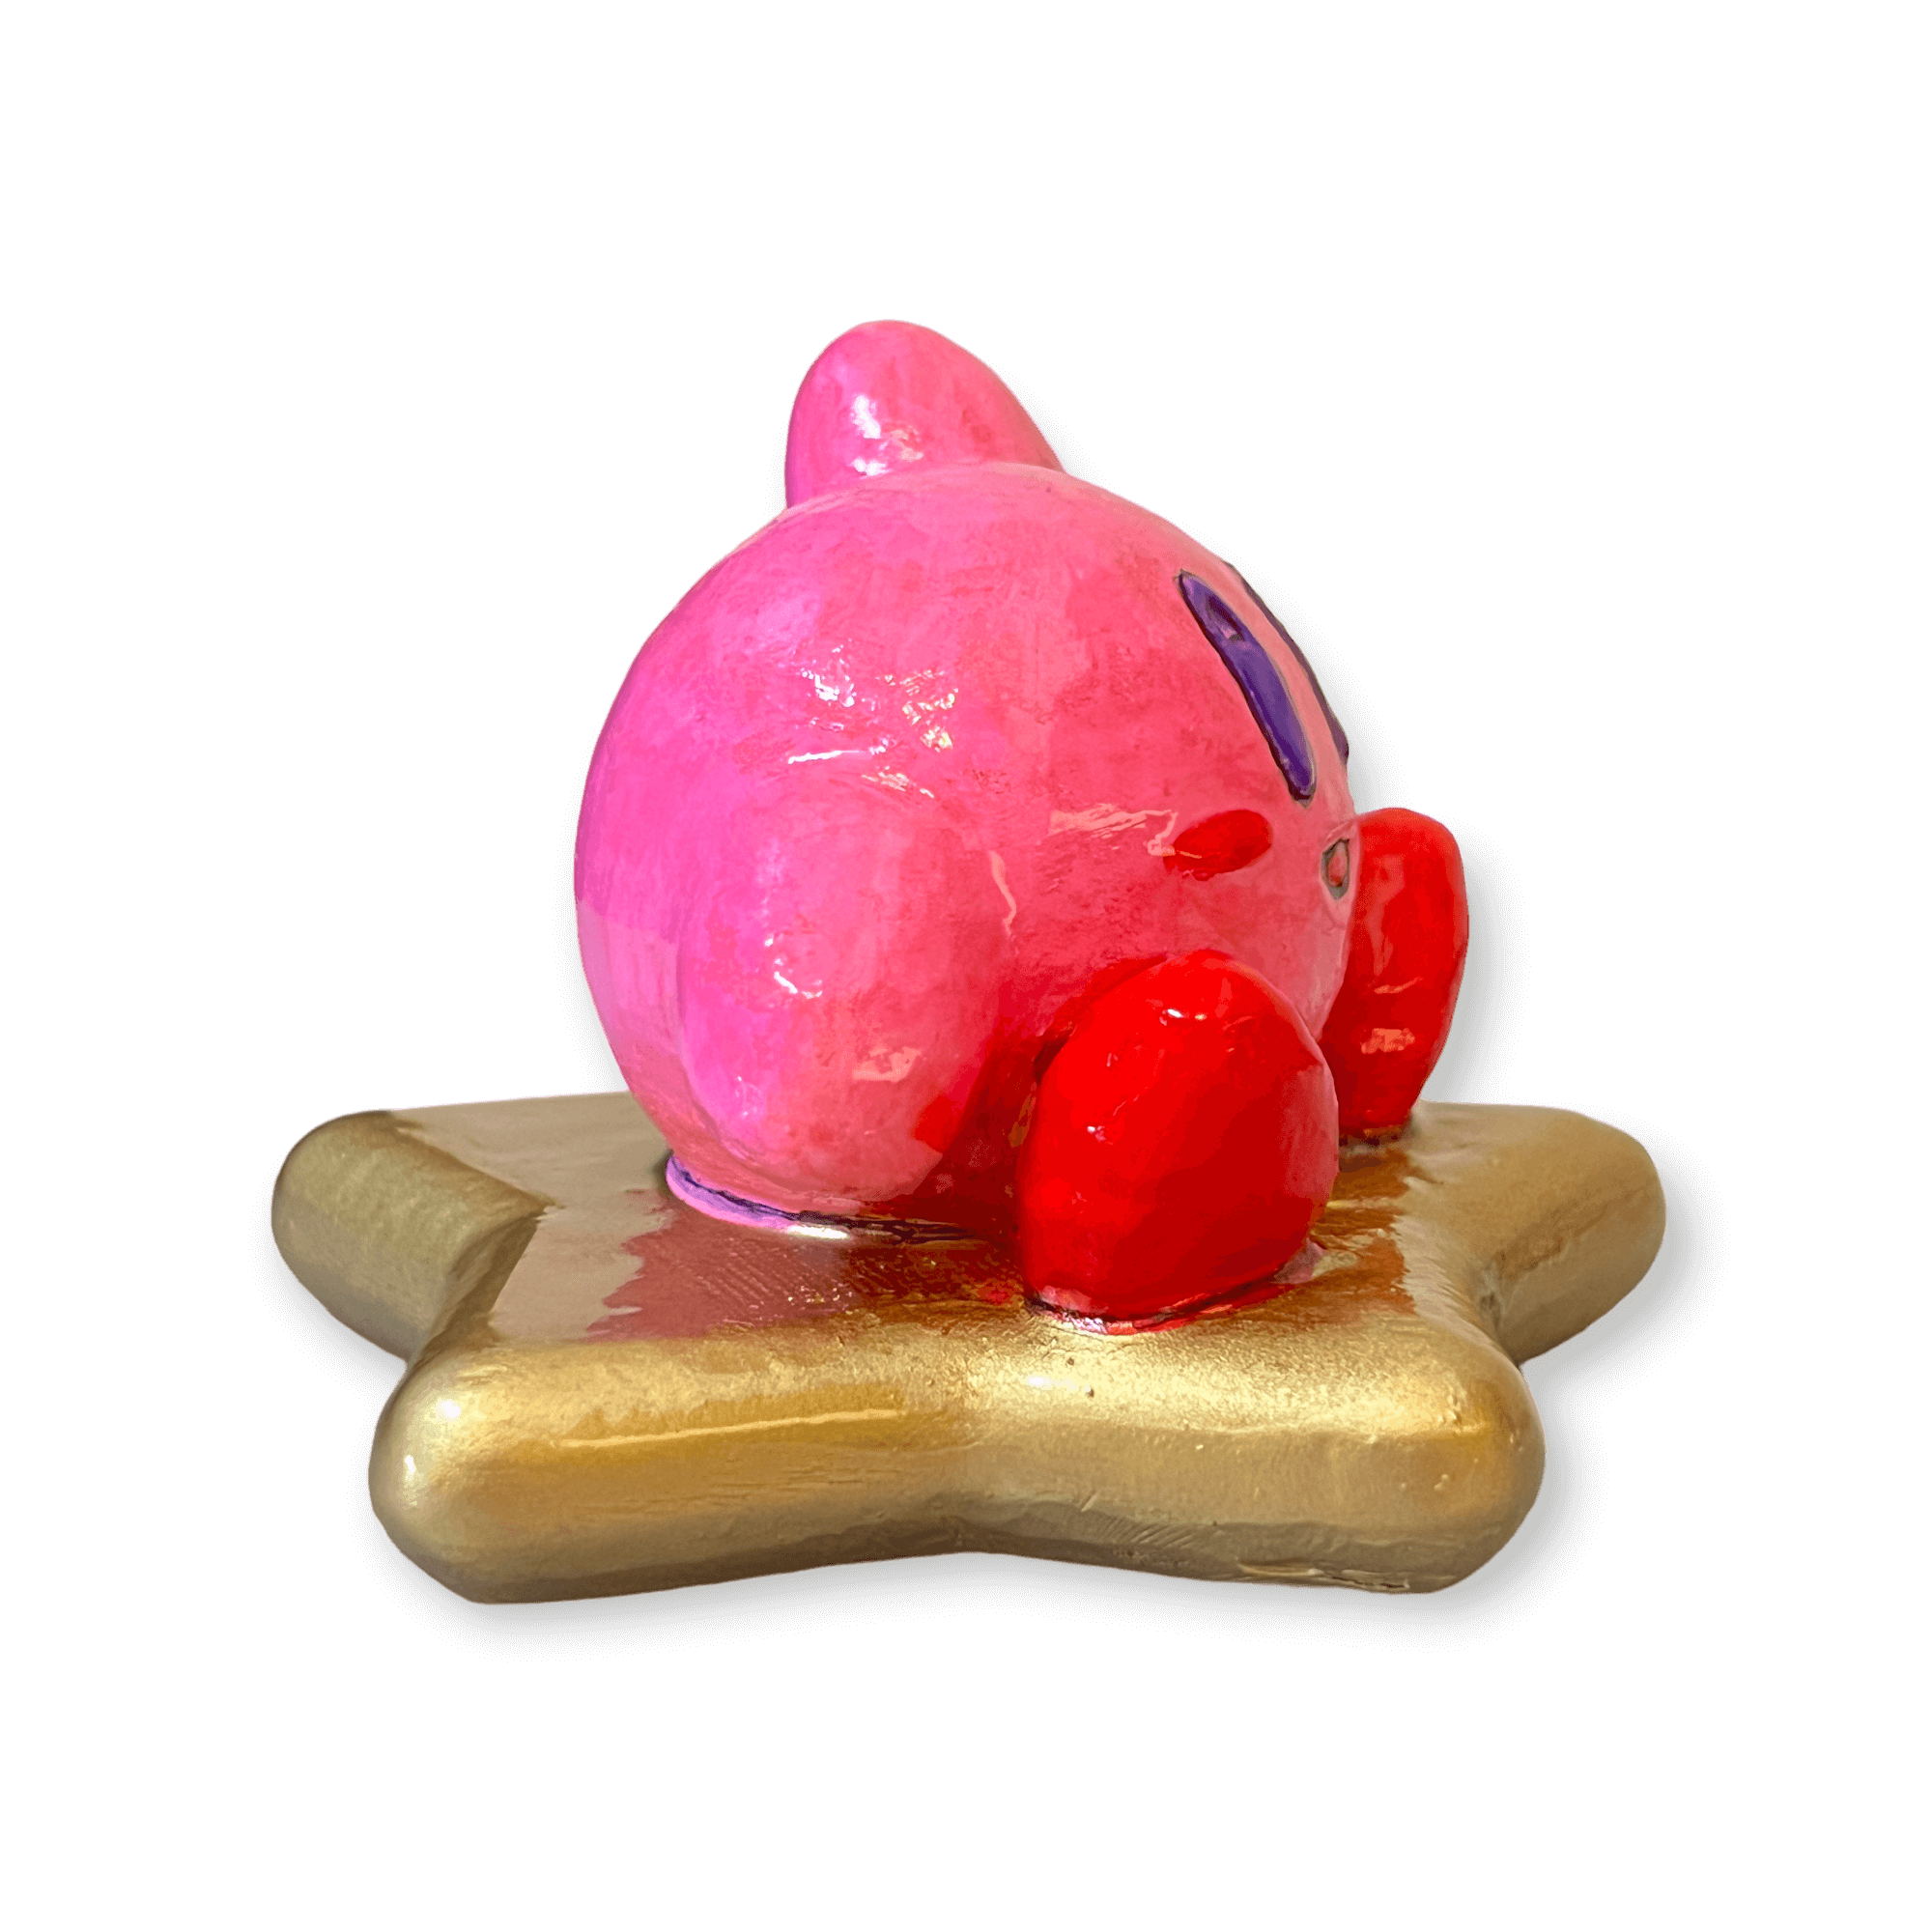 Kirby Air Ride 3D Print Kirby on Star3.png